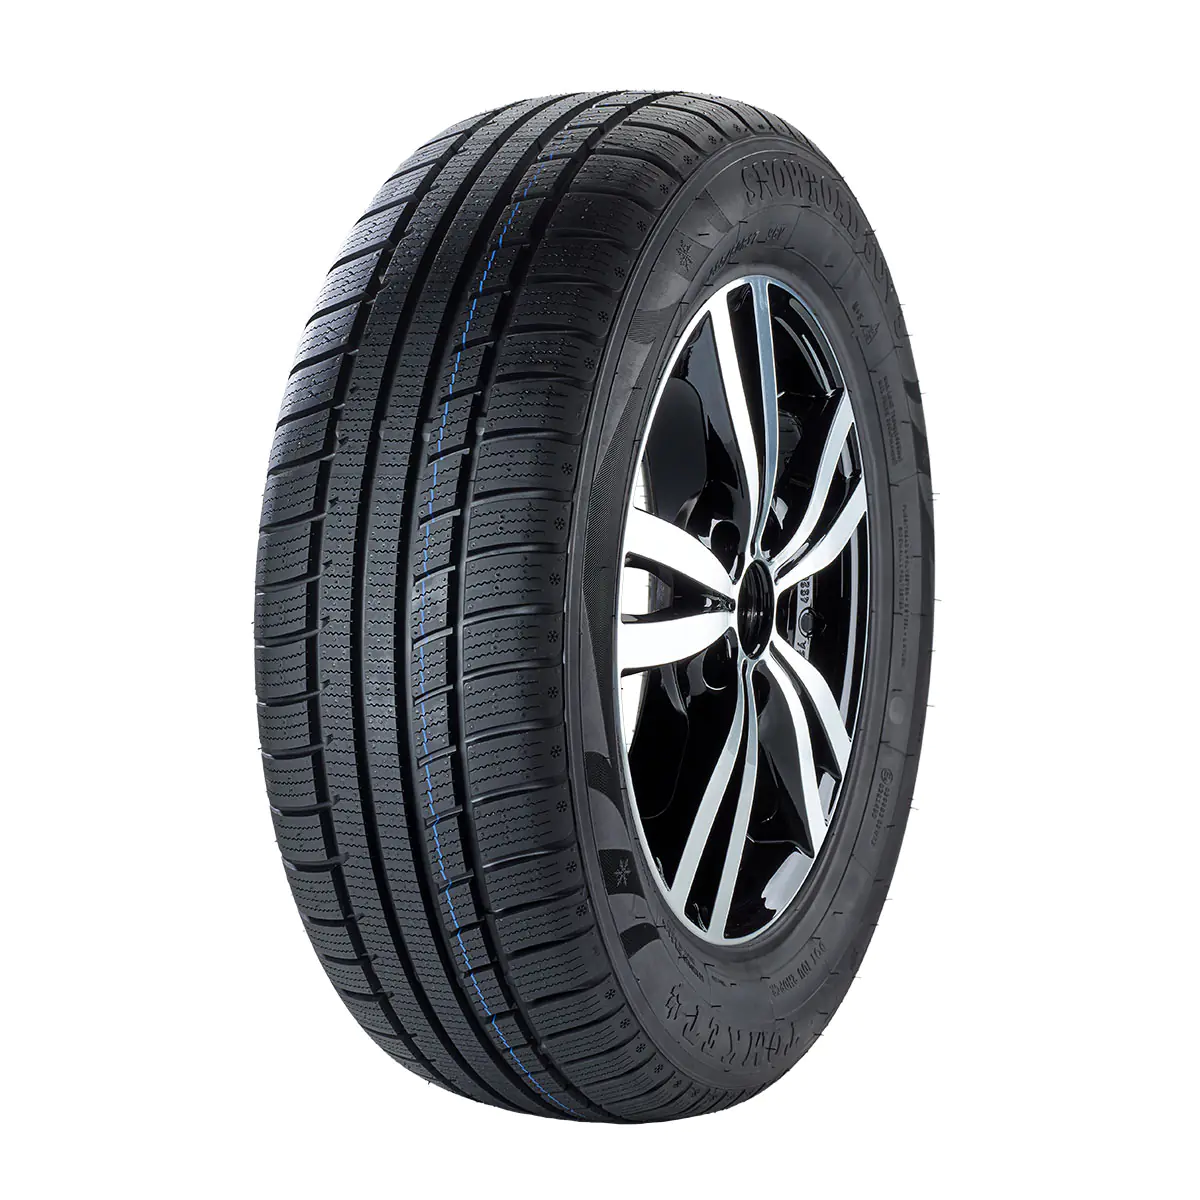 Gomme 4x4 Suv Tomket 215/60 R17 96V SNOWROAD SUV 3 M+S Invernale